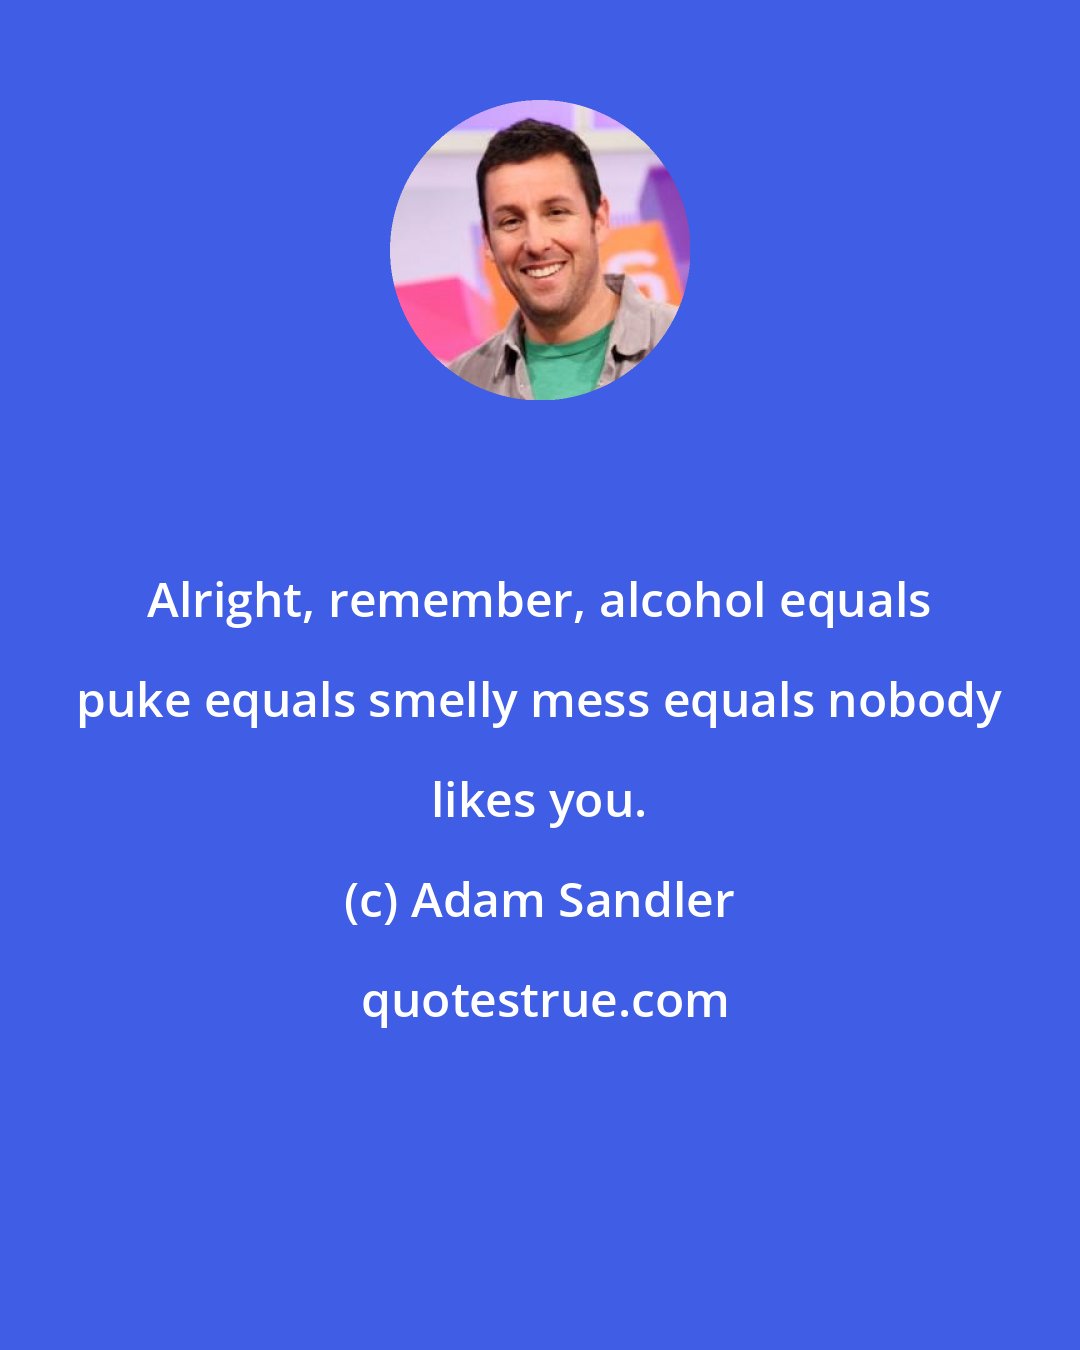 Adam Sandler: Alright, remember, alcohol equals puke equals smelly mess equals nobody likes you.